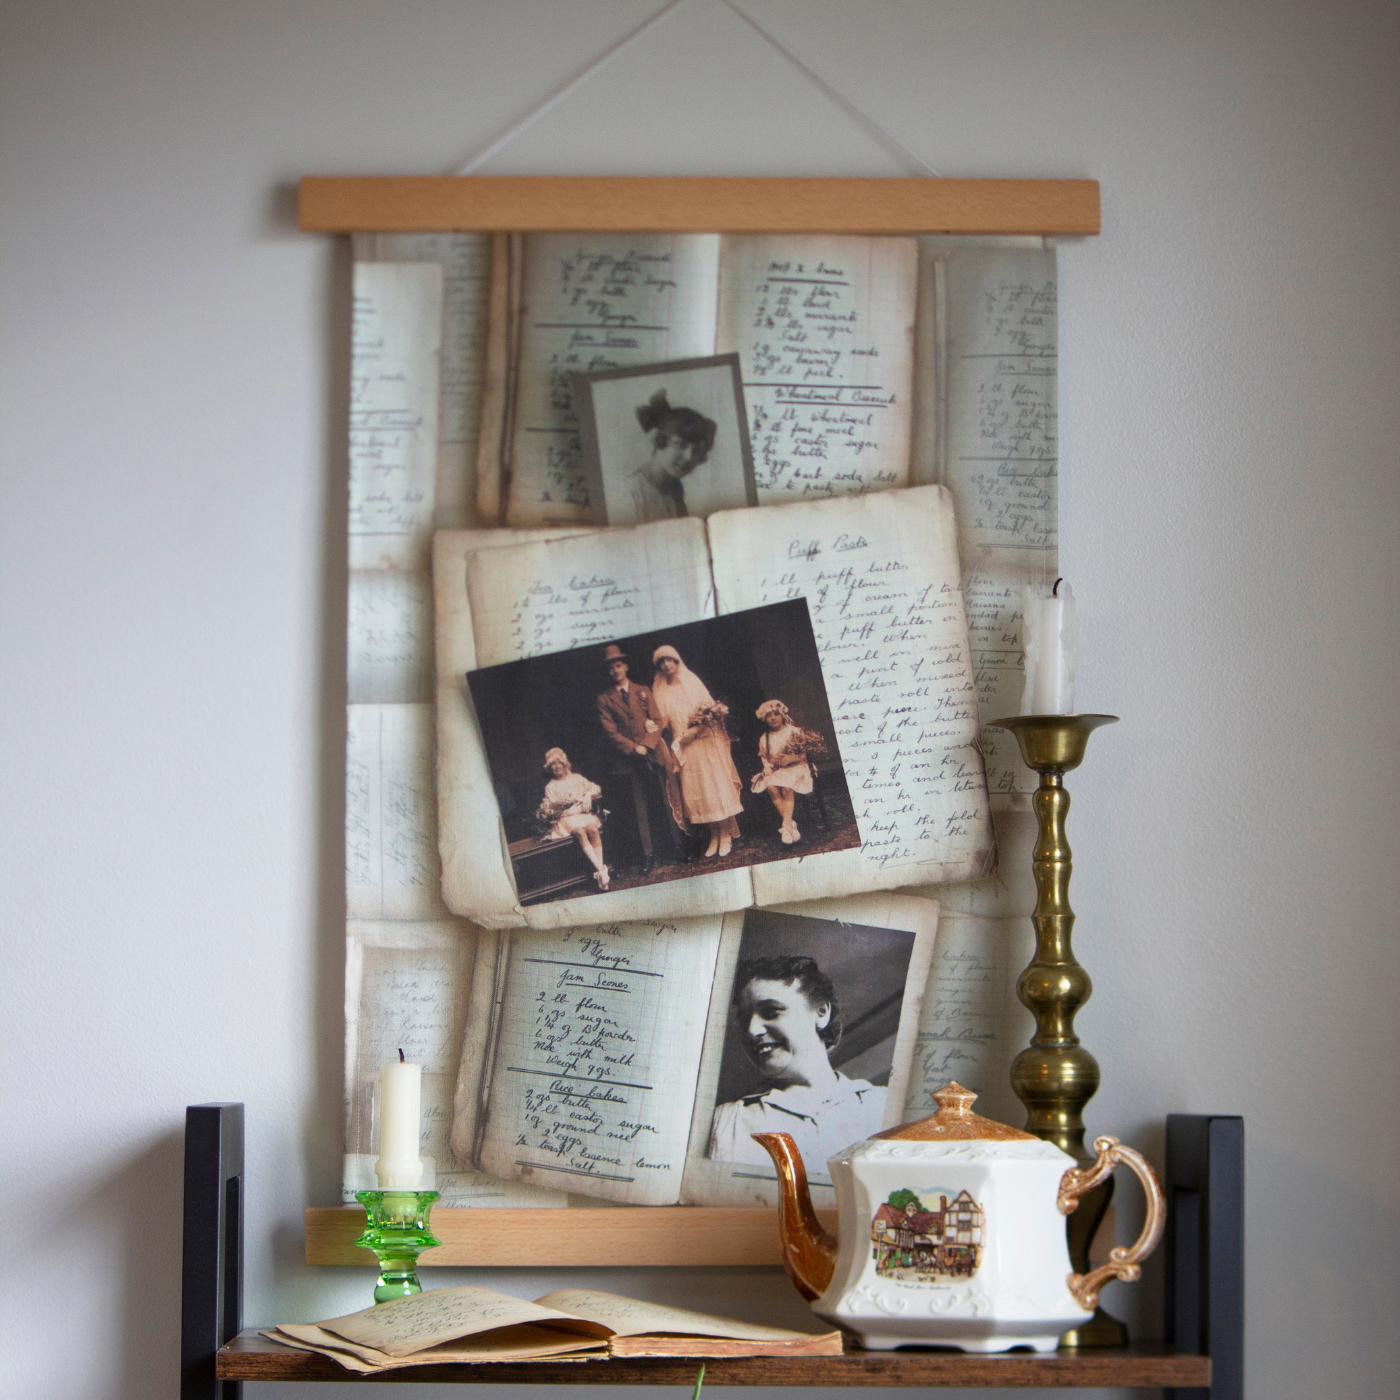 A wall hanging featuring handwritten recipes scattered along the back of the design and three photos on the top of the recipes, the top photo is a vintage photo of a woman smiling at the camera, the middle photo is a 1924 wedding photo with a groom and a bride standing in the middle of the photo with two small girls sitting at either side of them holding flower bouquets and the bottom photo is another vintage photo of a woman smiling and looking to the left. The wall hanging is hanging against a white wall and above a bookcase with brown shelves and black edges. A short green candlestick with a short white candle in it, an open book, a cream teapot with a brown top, handle and spout and a drawing on a hotel on it and a short white candle in a brass candlestick, are visible on the top shelf from left to right.